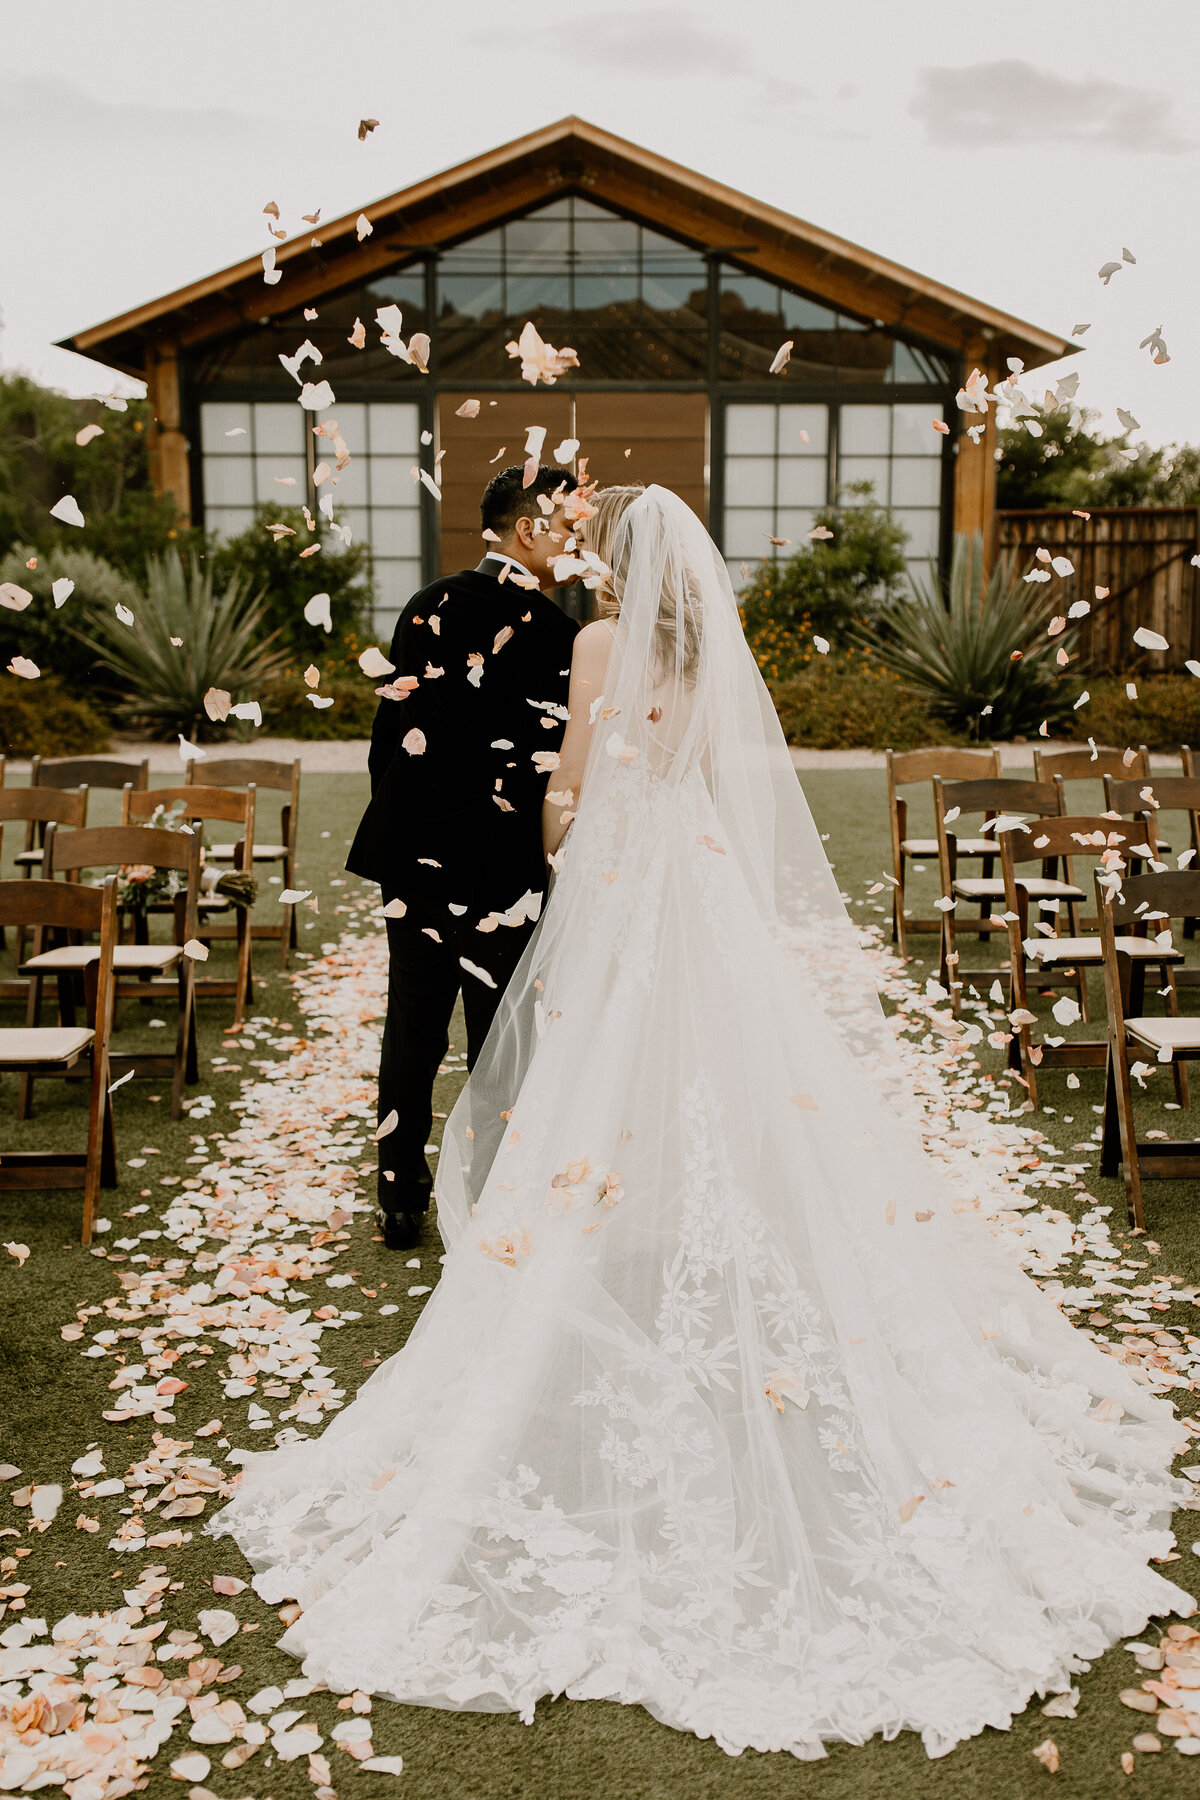 A bride and groom standing in the middle of an aisle kissing with flower petals surrounding them